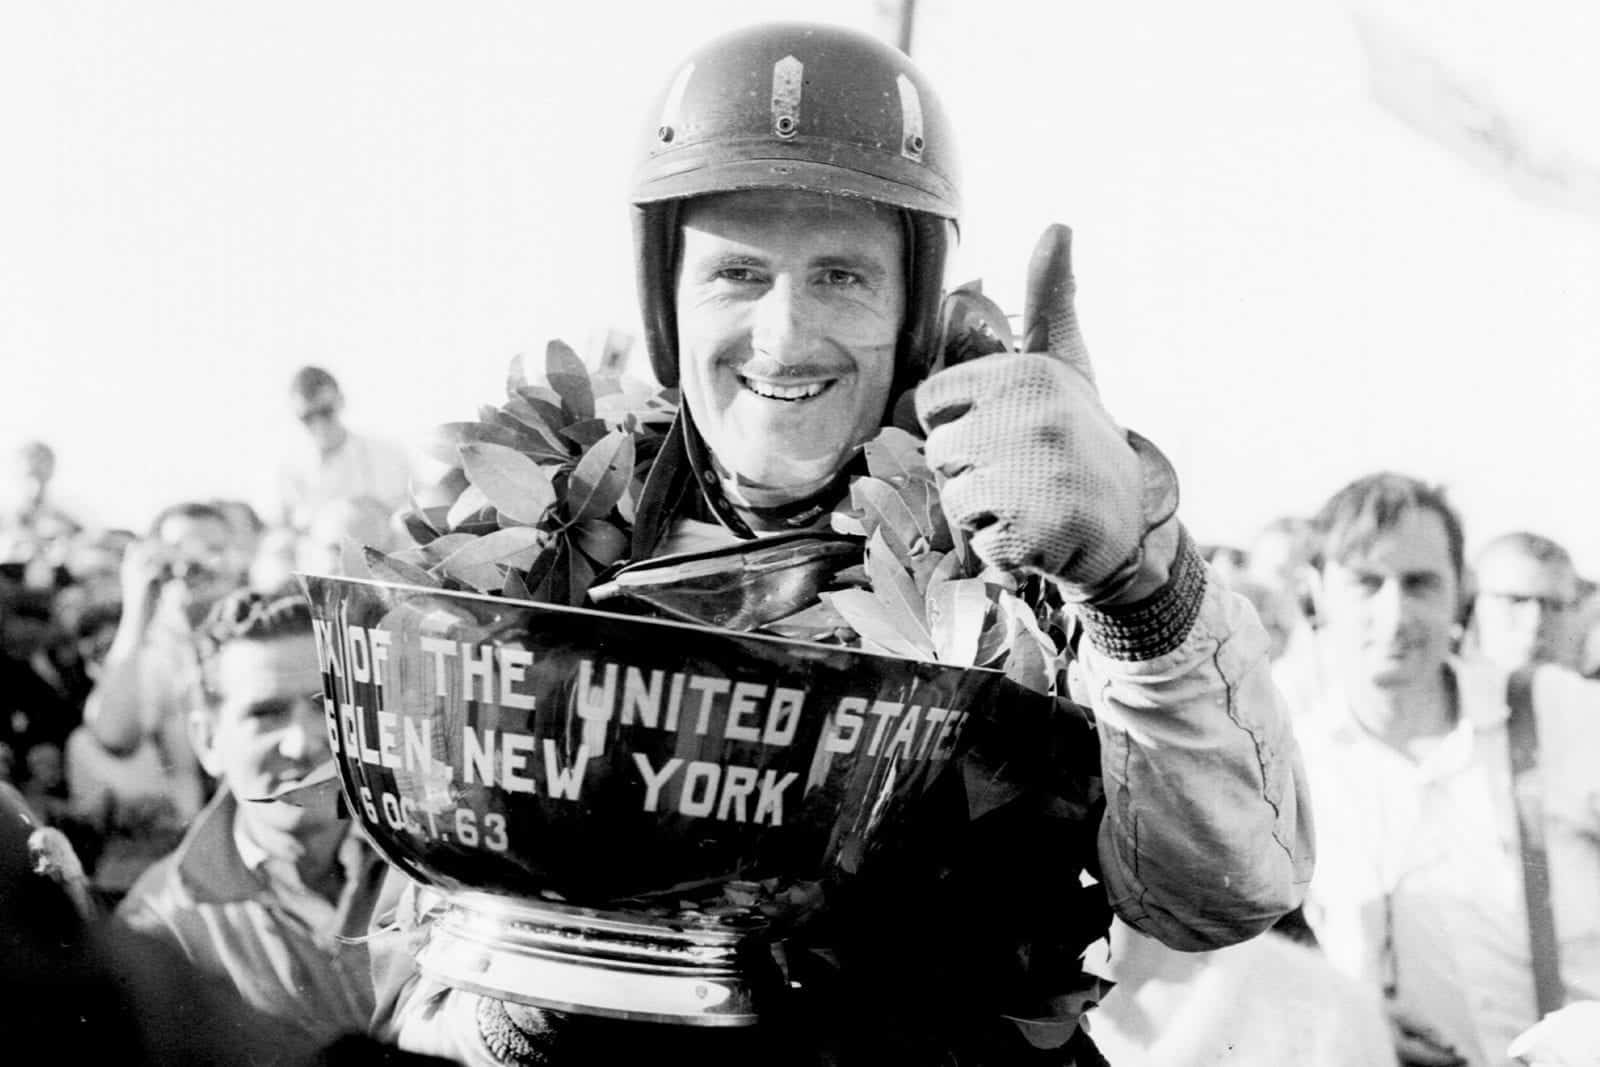 Graham Hill (BRM/Owen Racing Org.) celebrates his 1st position on the podium with a thumbs-up.